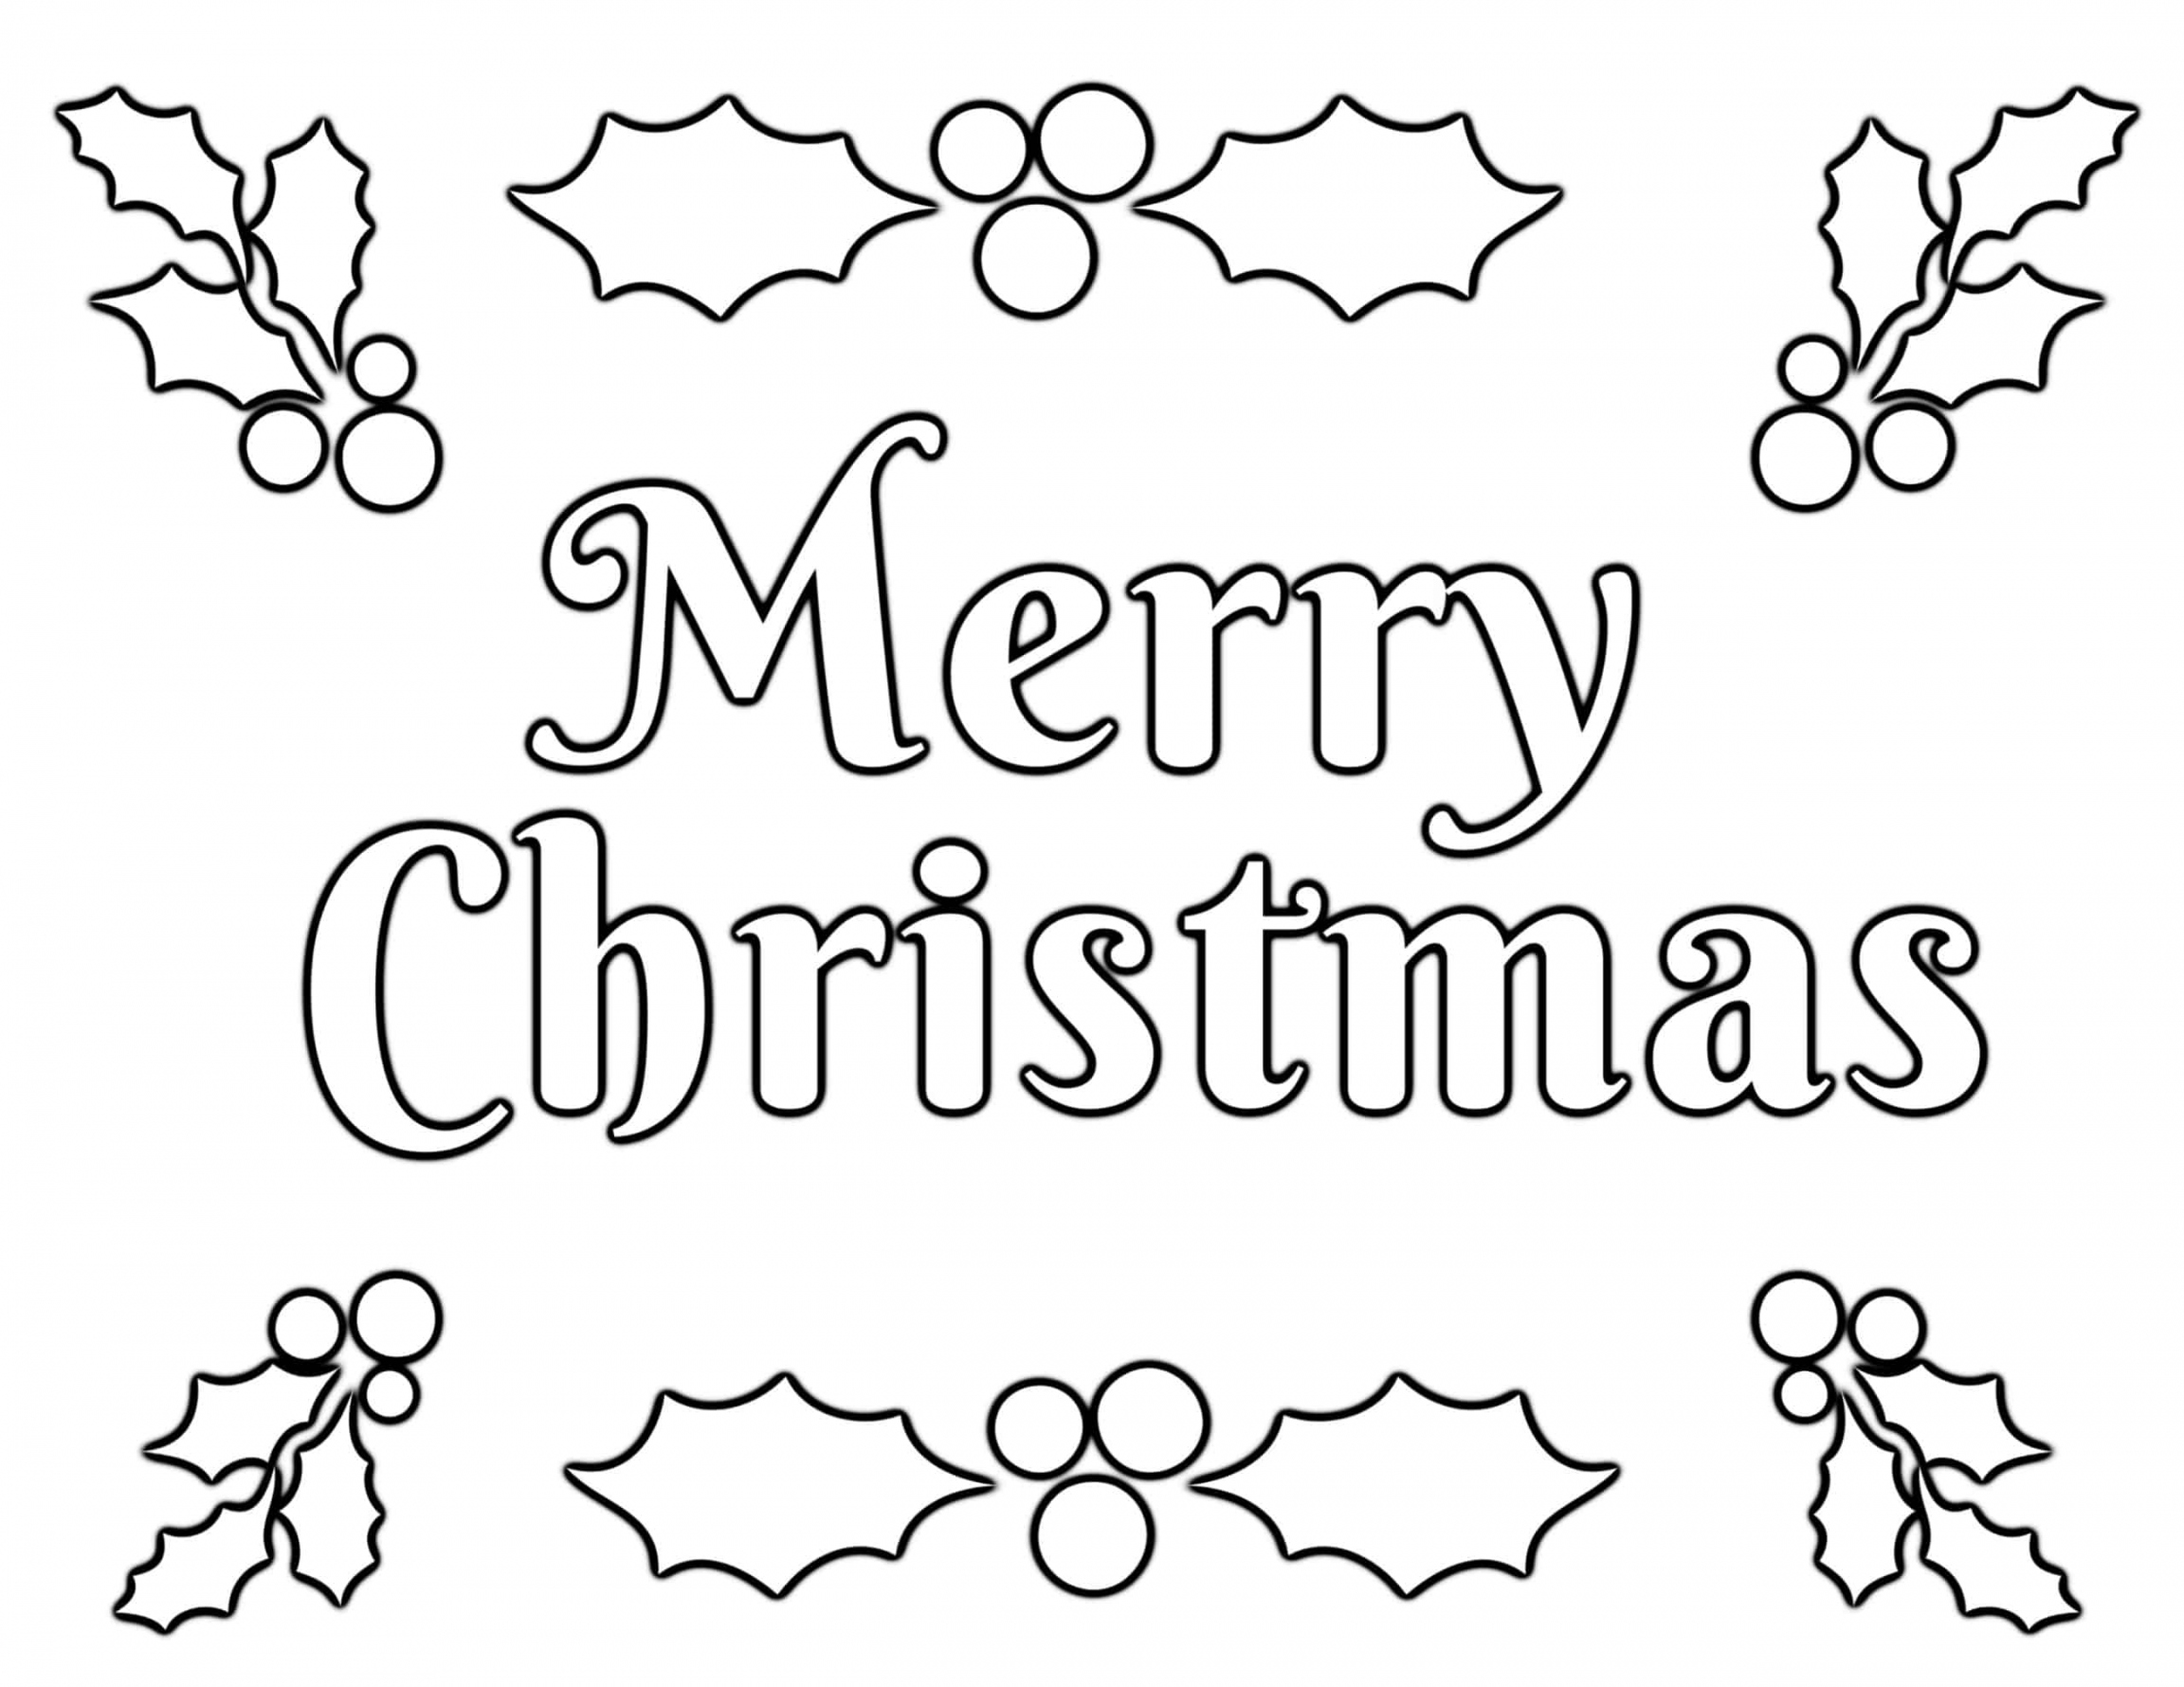 Free Printable Coloring Pages Christmas - Printable - Christmas Coloring Pages for Kids (% FREE) Easy Printable PDF